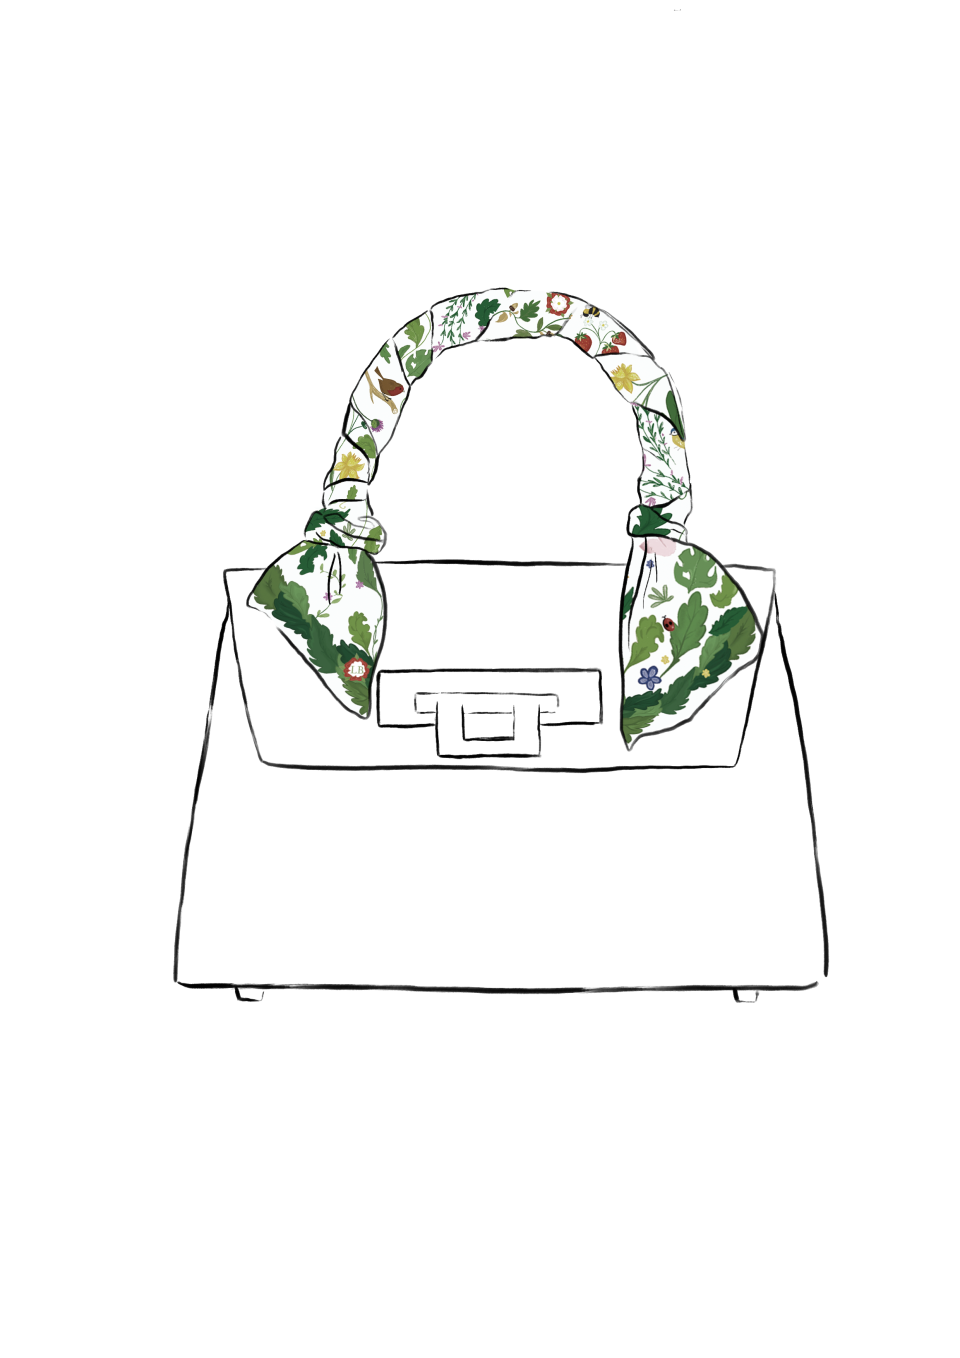 Featuring Britain’s national flowers as well as other patriotic symbols, British accessories and occasionwear brand Lalage’s ribbon scarf can be worn tied around bag handles, around wrists, or as a belt.